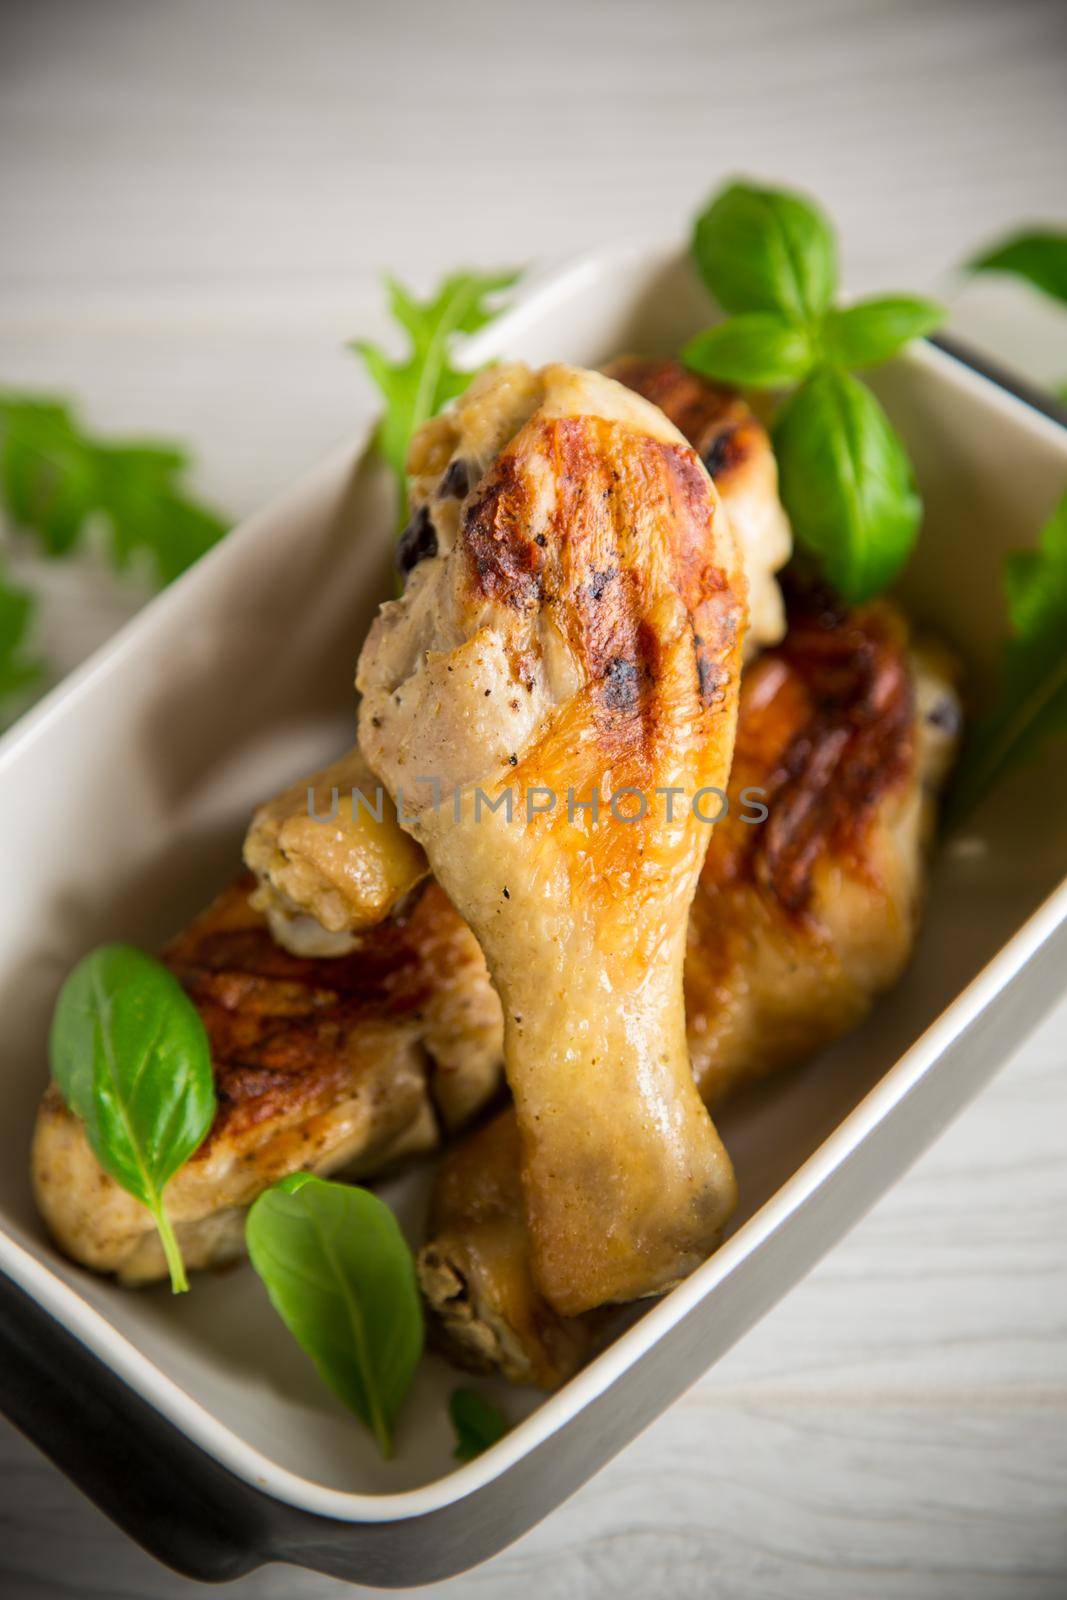 grilled chicken legs fried with spices and herbs in a ceramic bowl